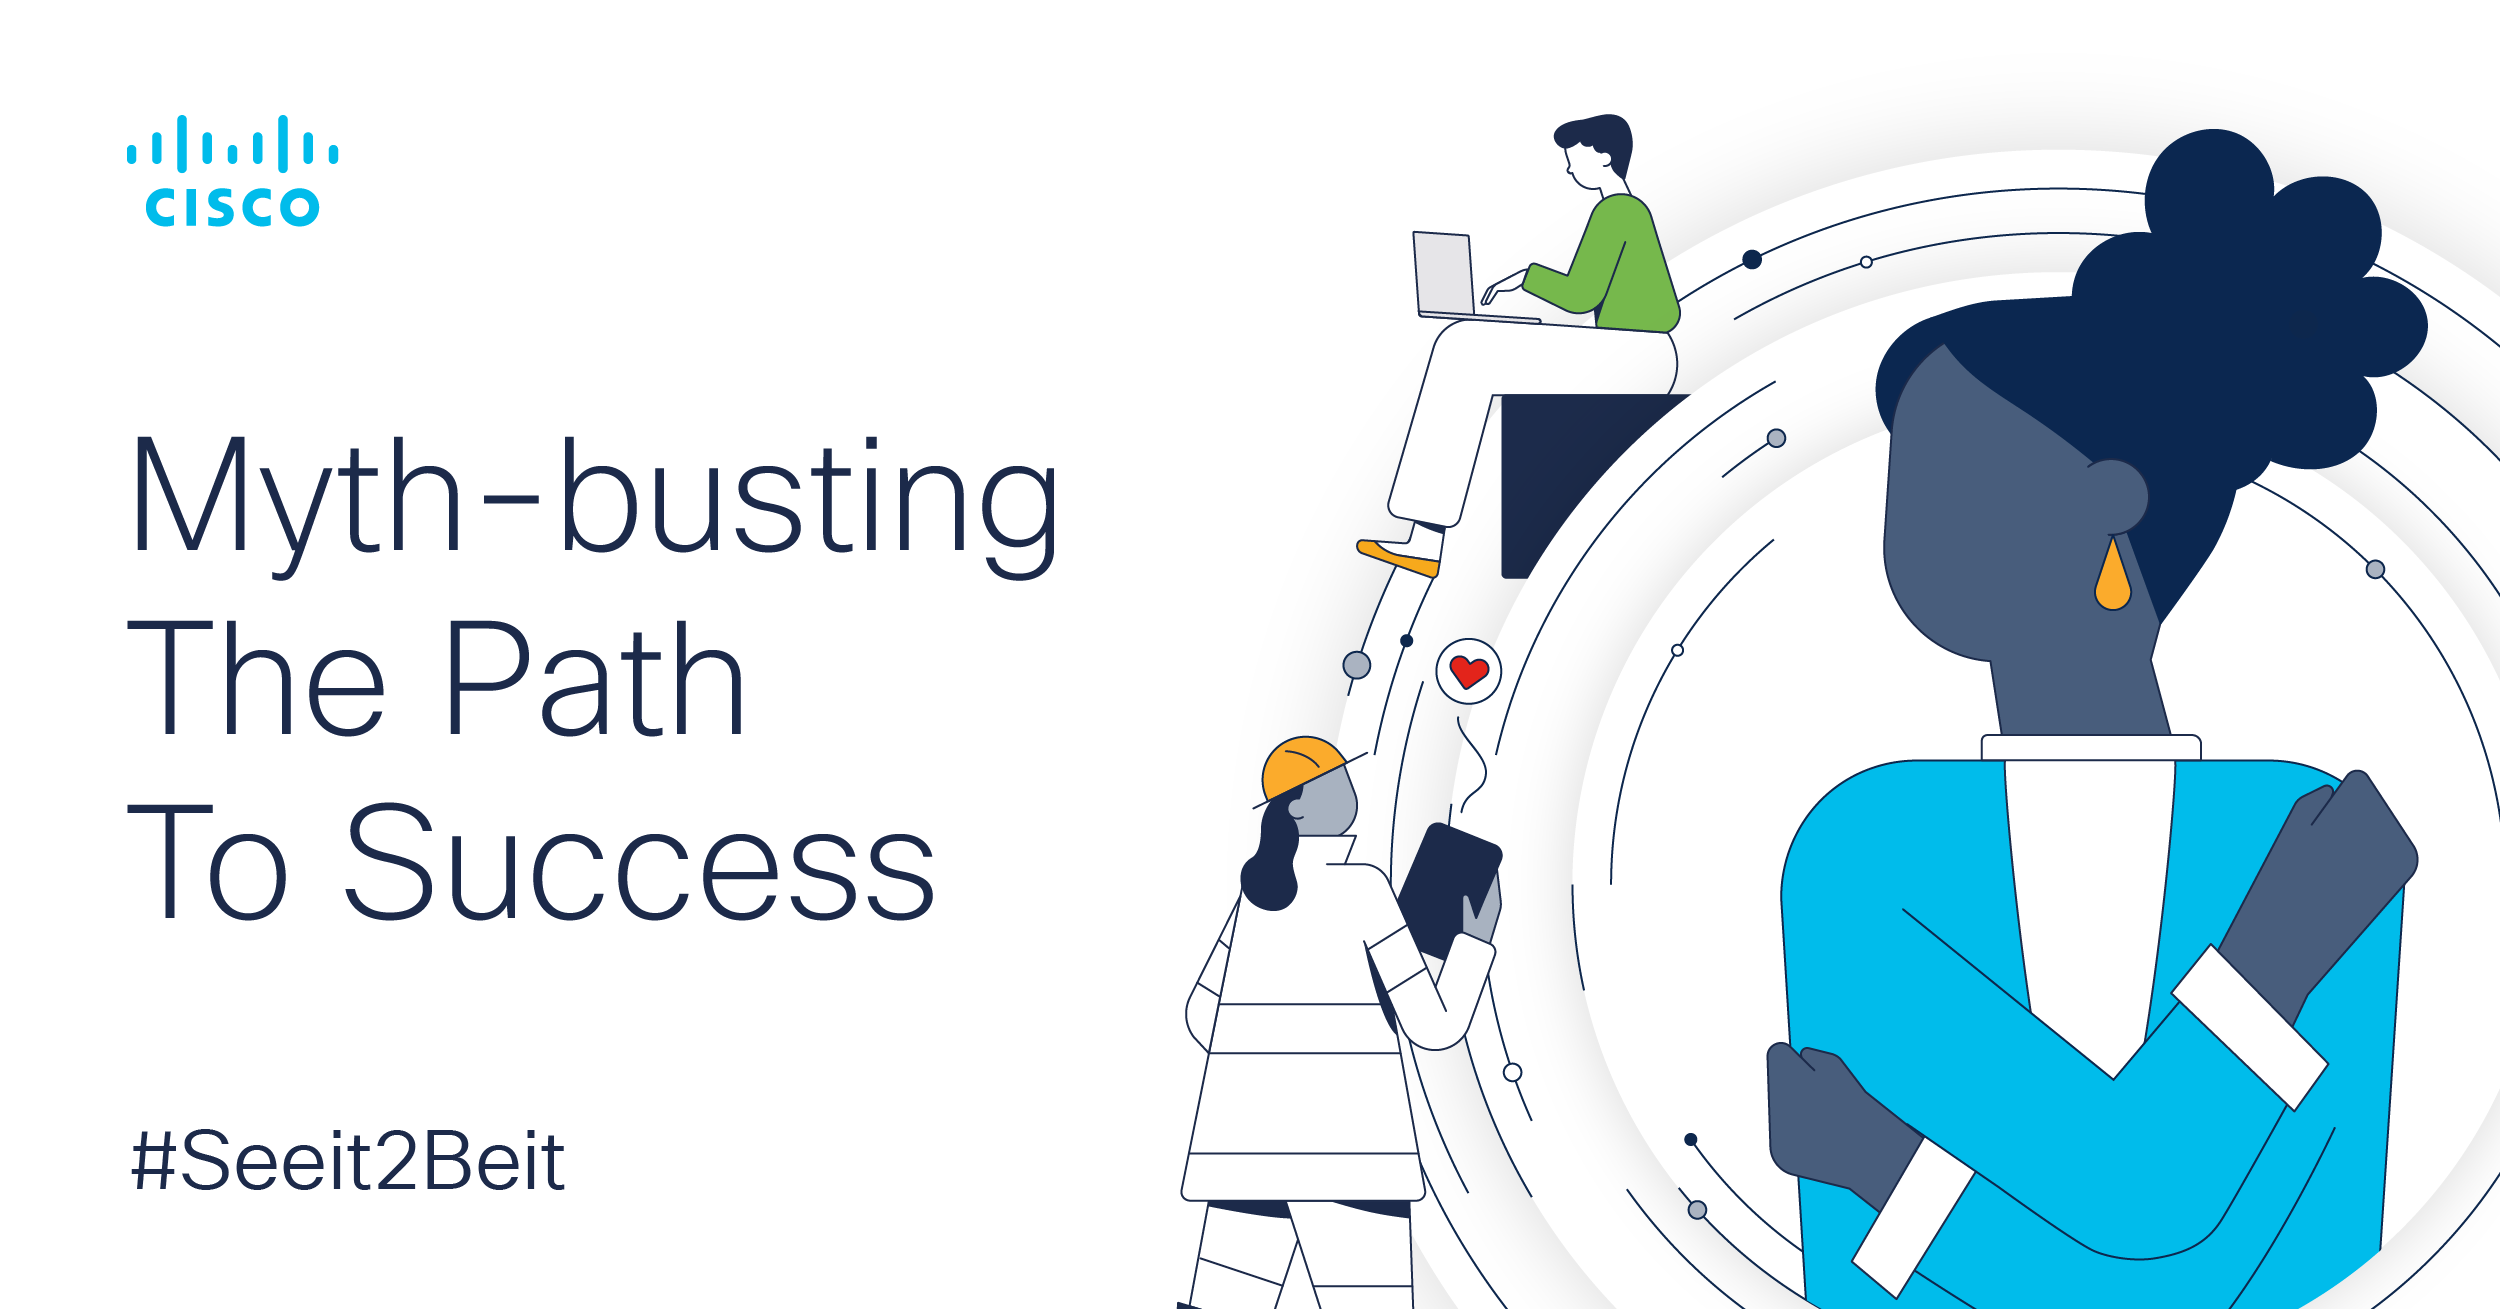 Myth-busting the Route To Success